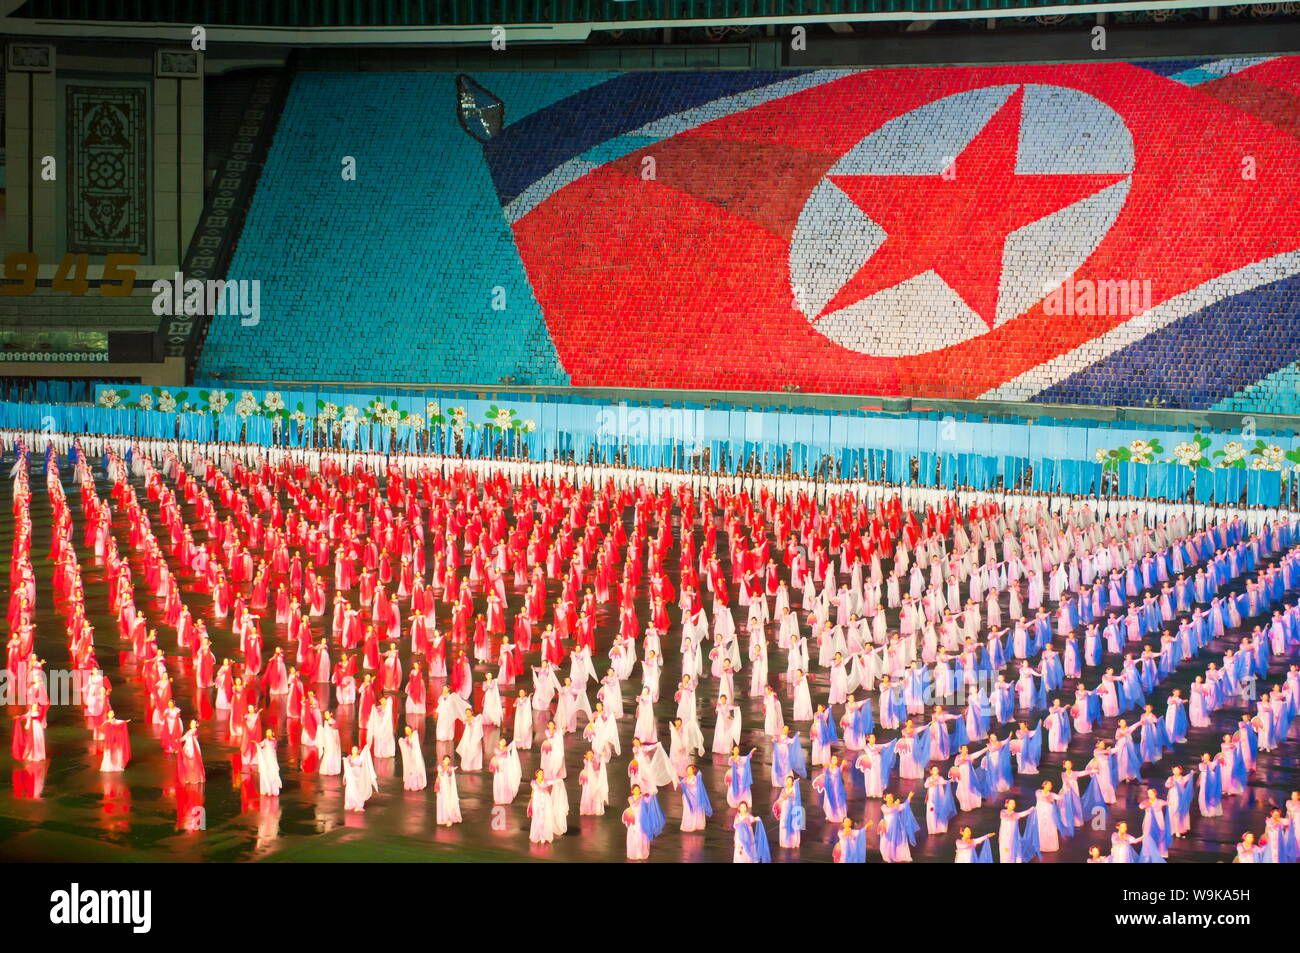 Dancers and acrobats at the Airand festival, Mass games in Pyongyang, North Korea, Asia Stock Photo